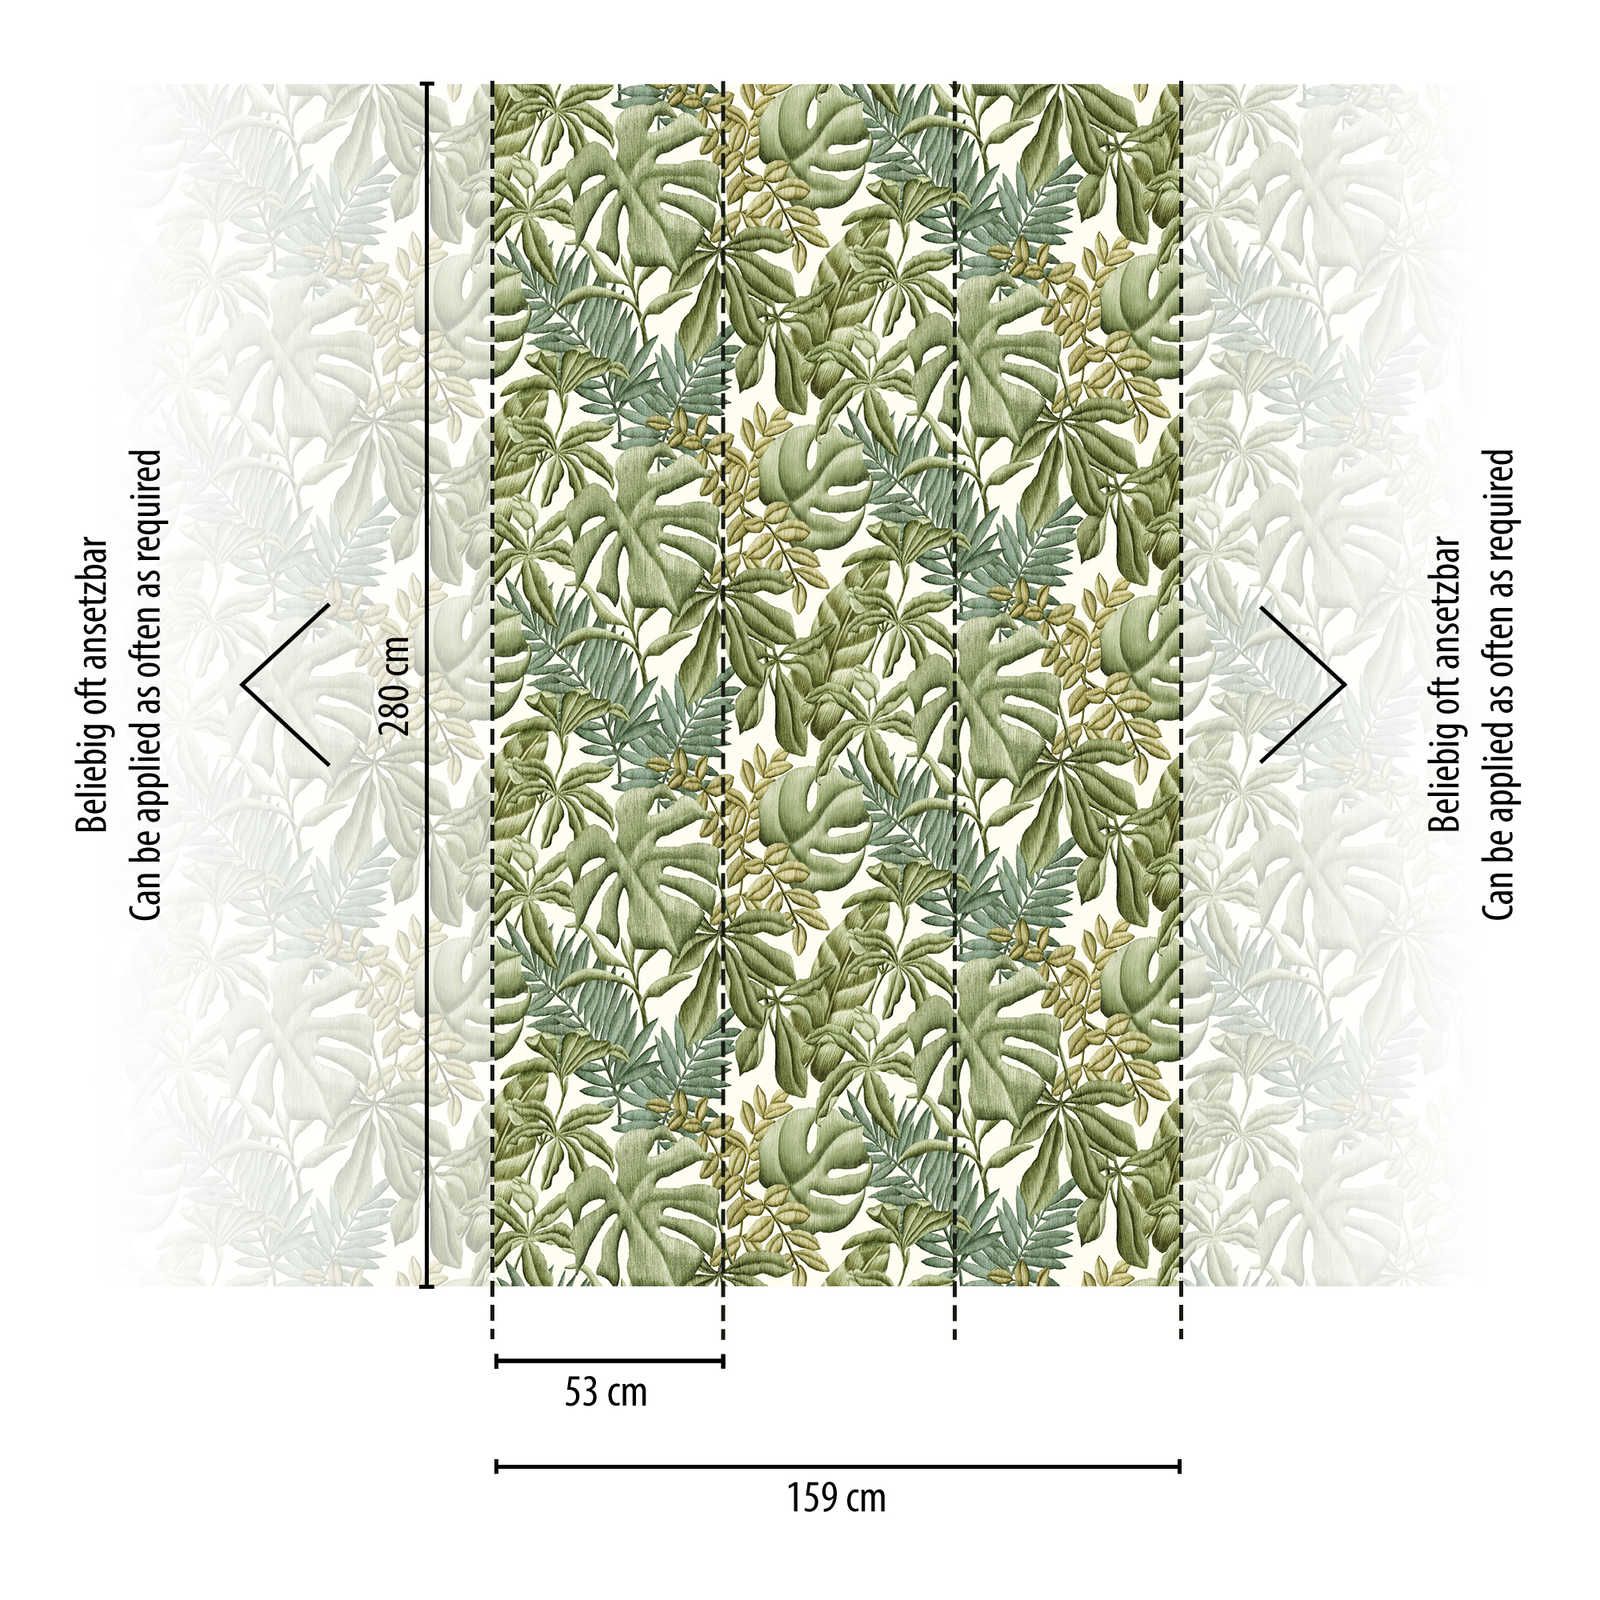             Non-woven wallpaper with various leaves - green, cream
        